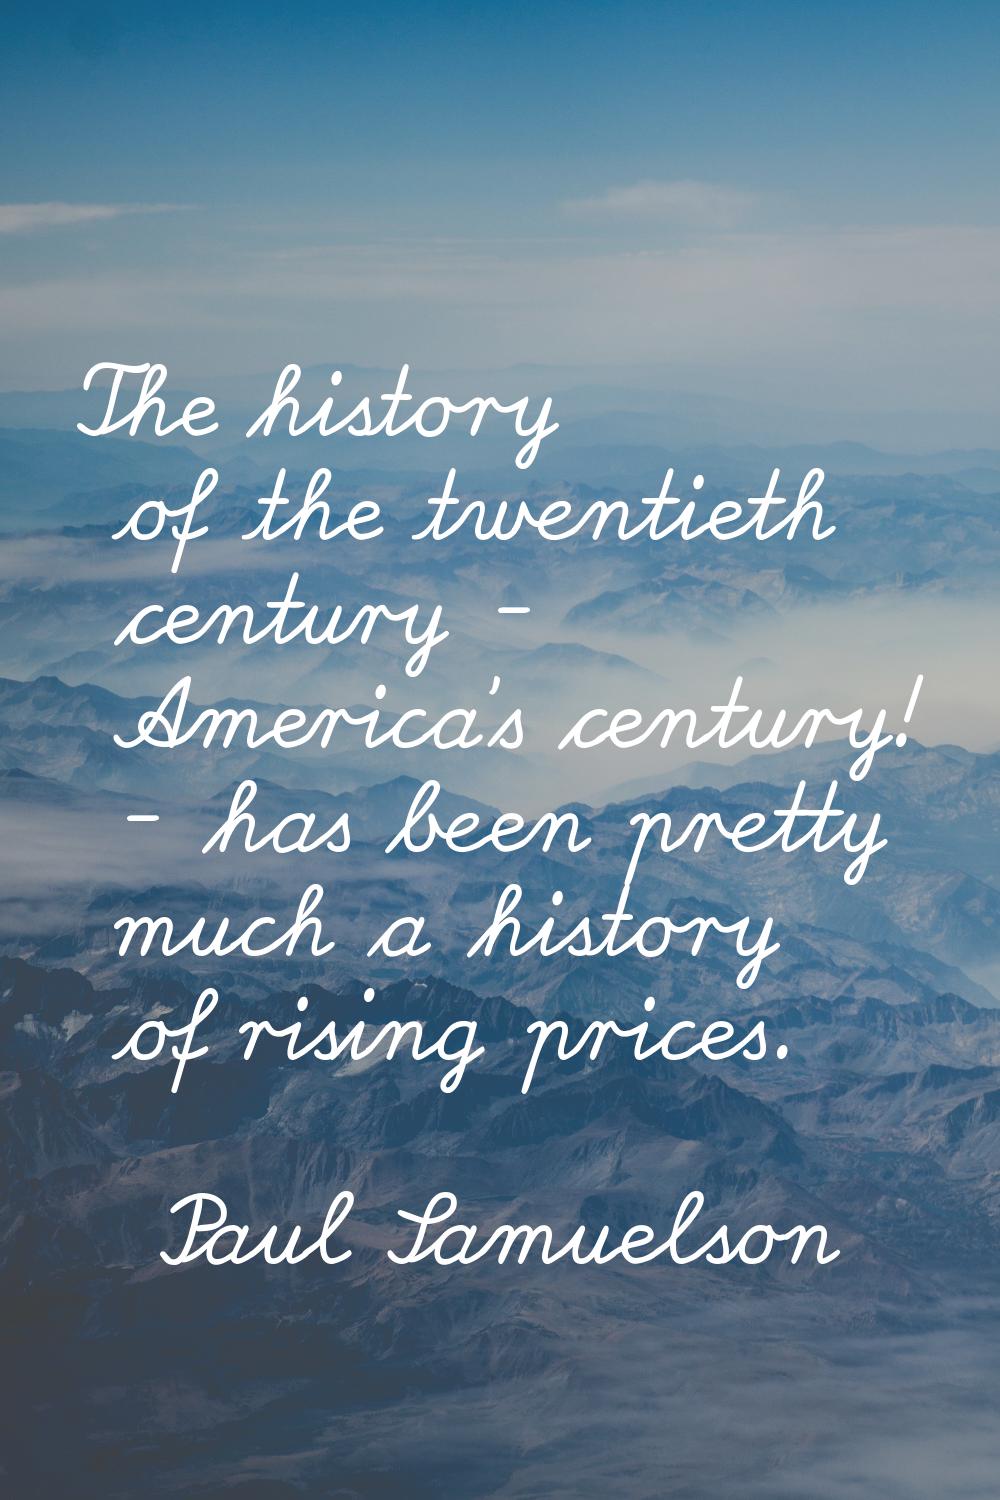 The history of the twentieth century - America's century! - has been pretty much a history of risin